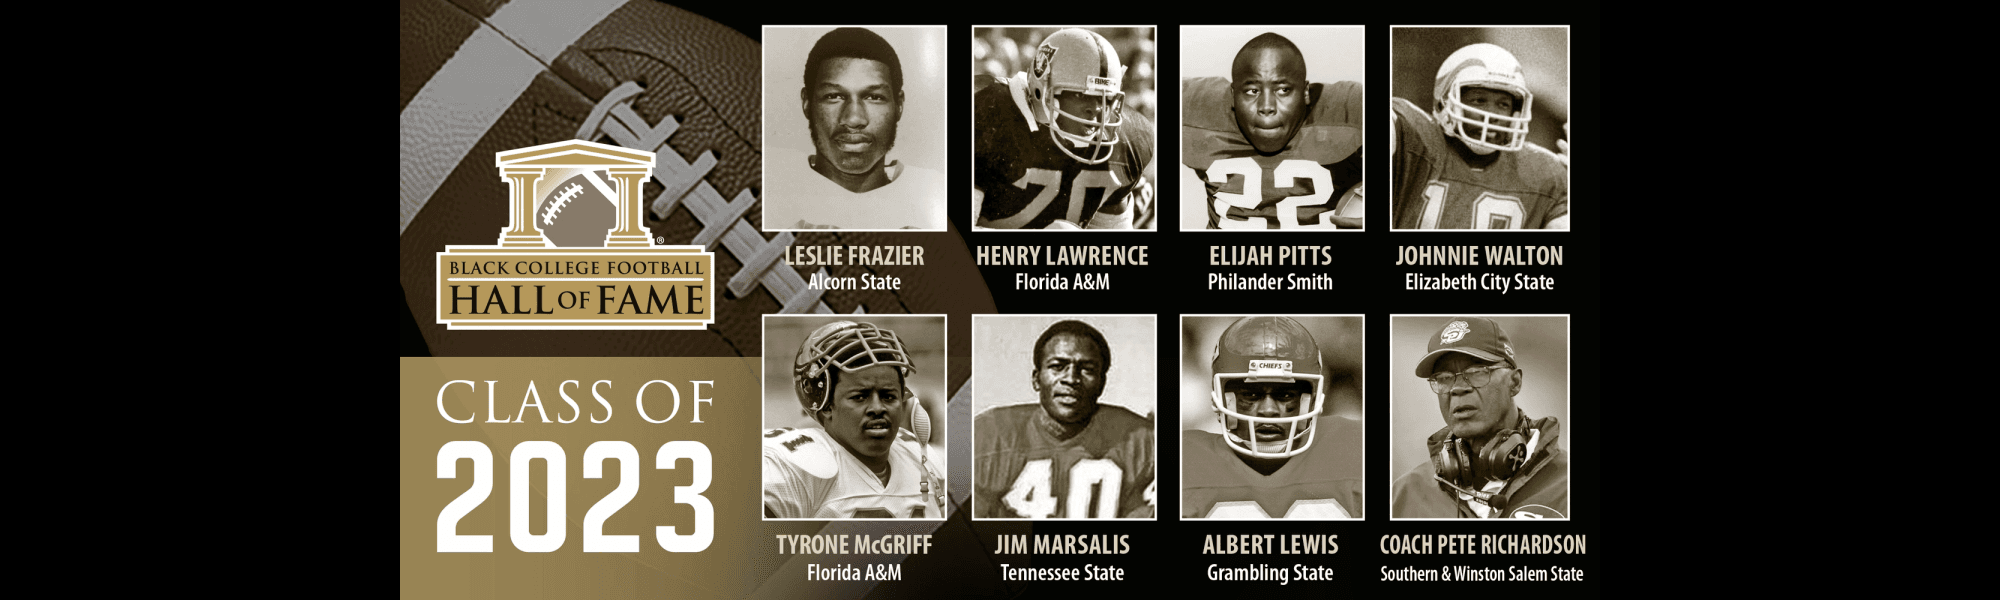 Black College Football Hall of Fame Class of 2023 Announced